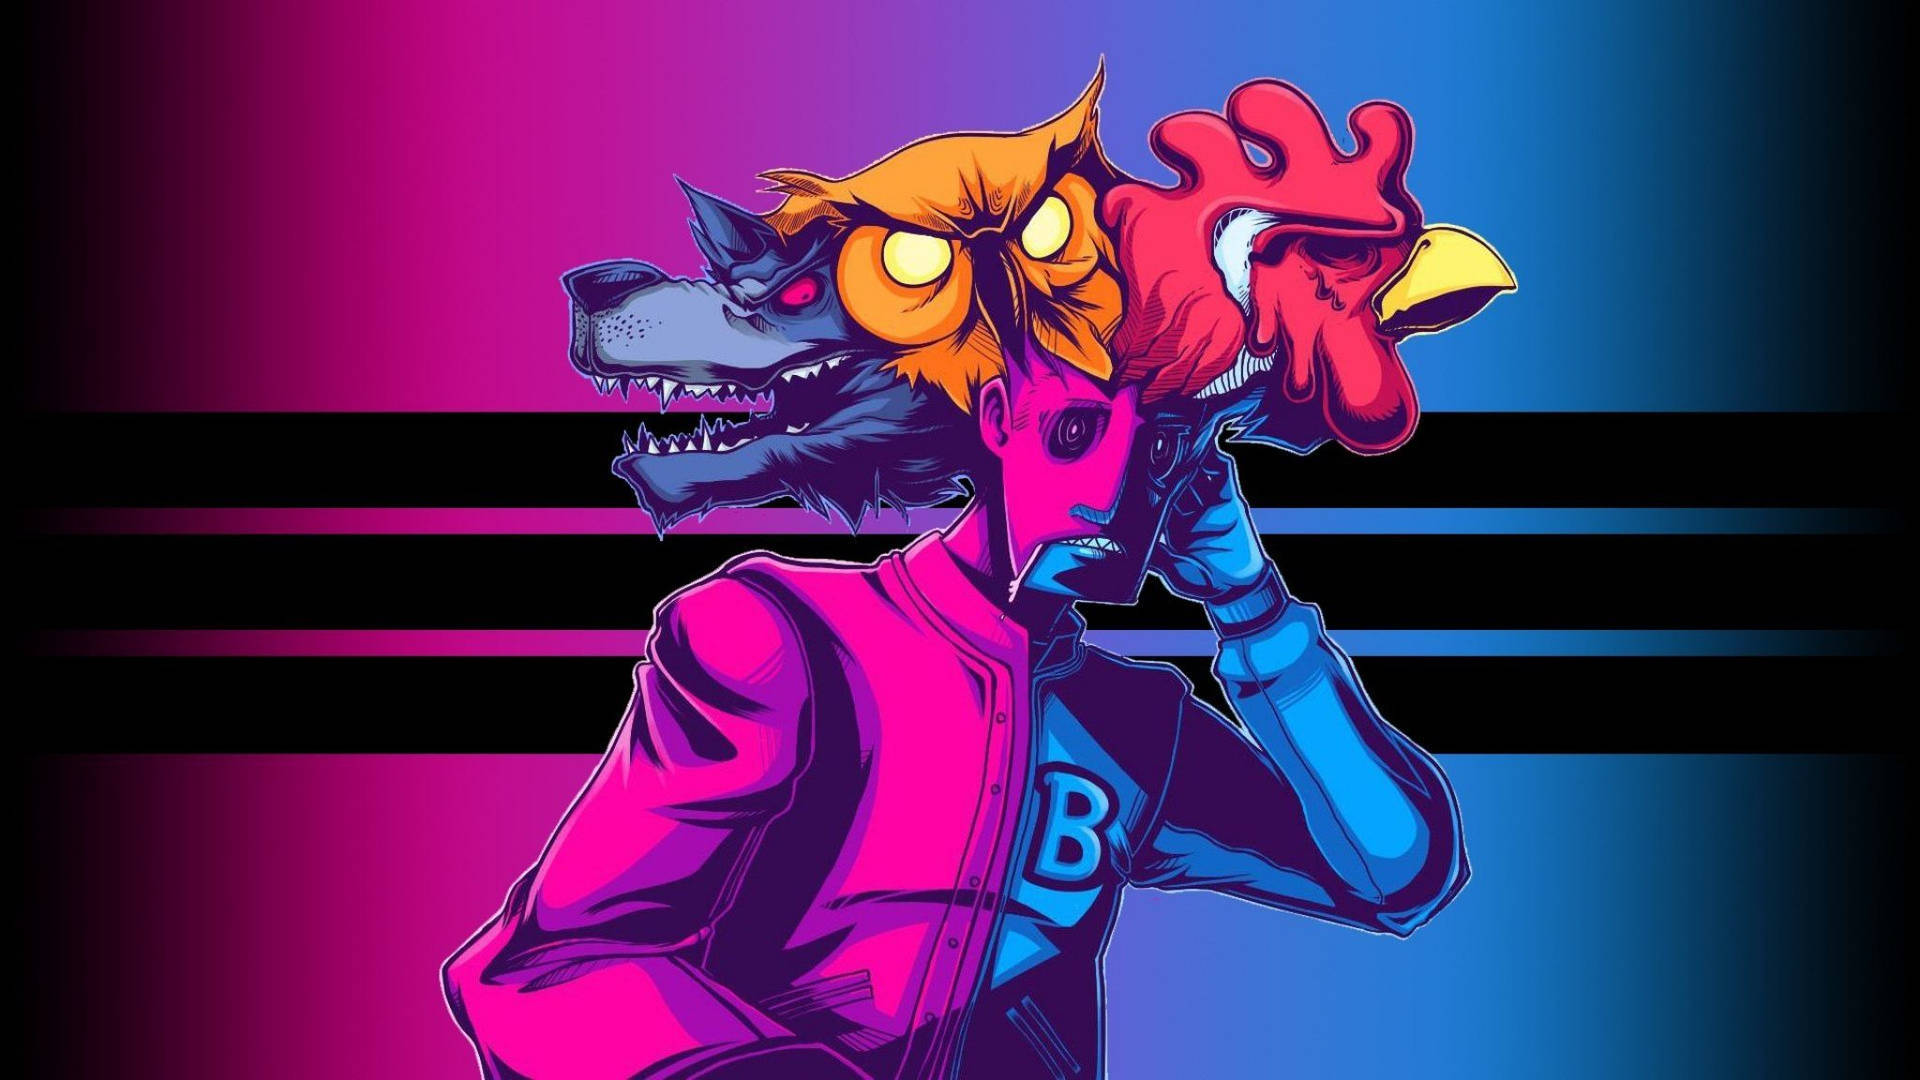 Free Hotline Miami Wallpaper Downloads, [100+] Hotline Miami Wallpapers for  FREE 